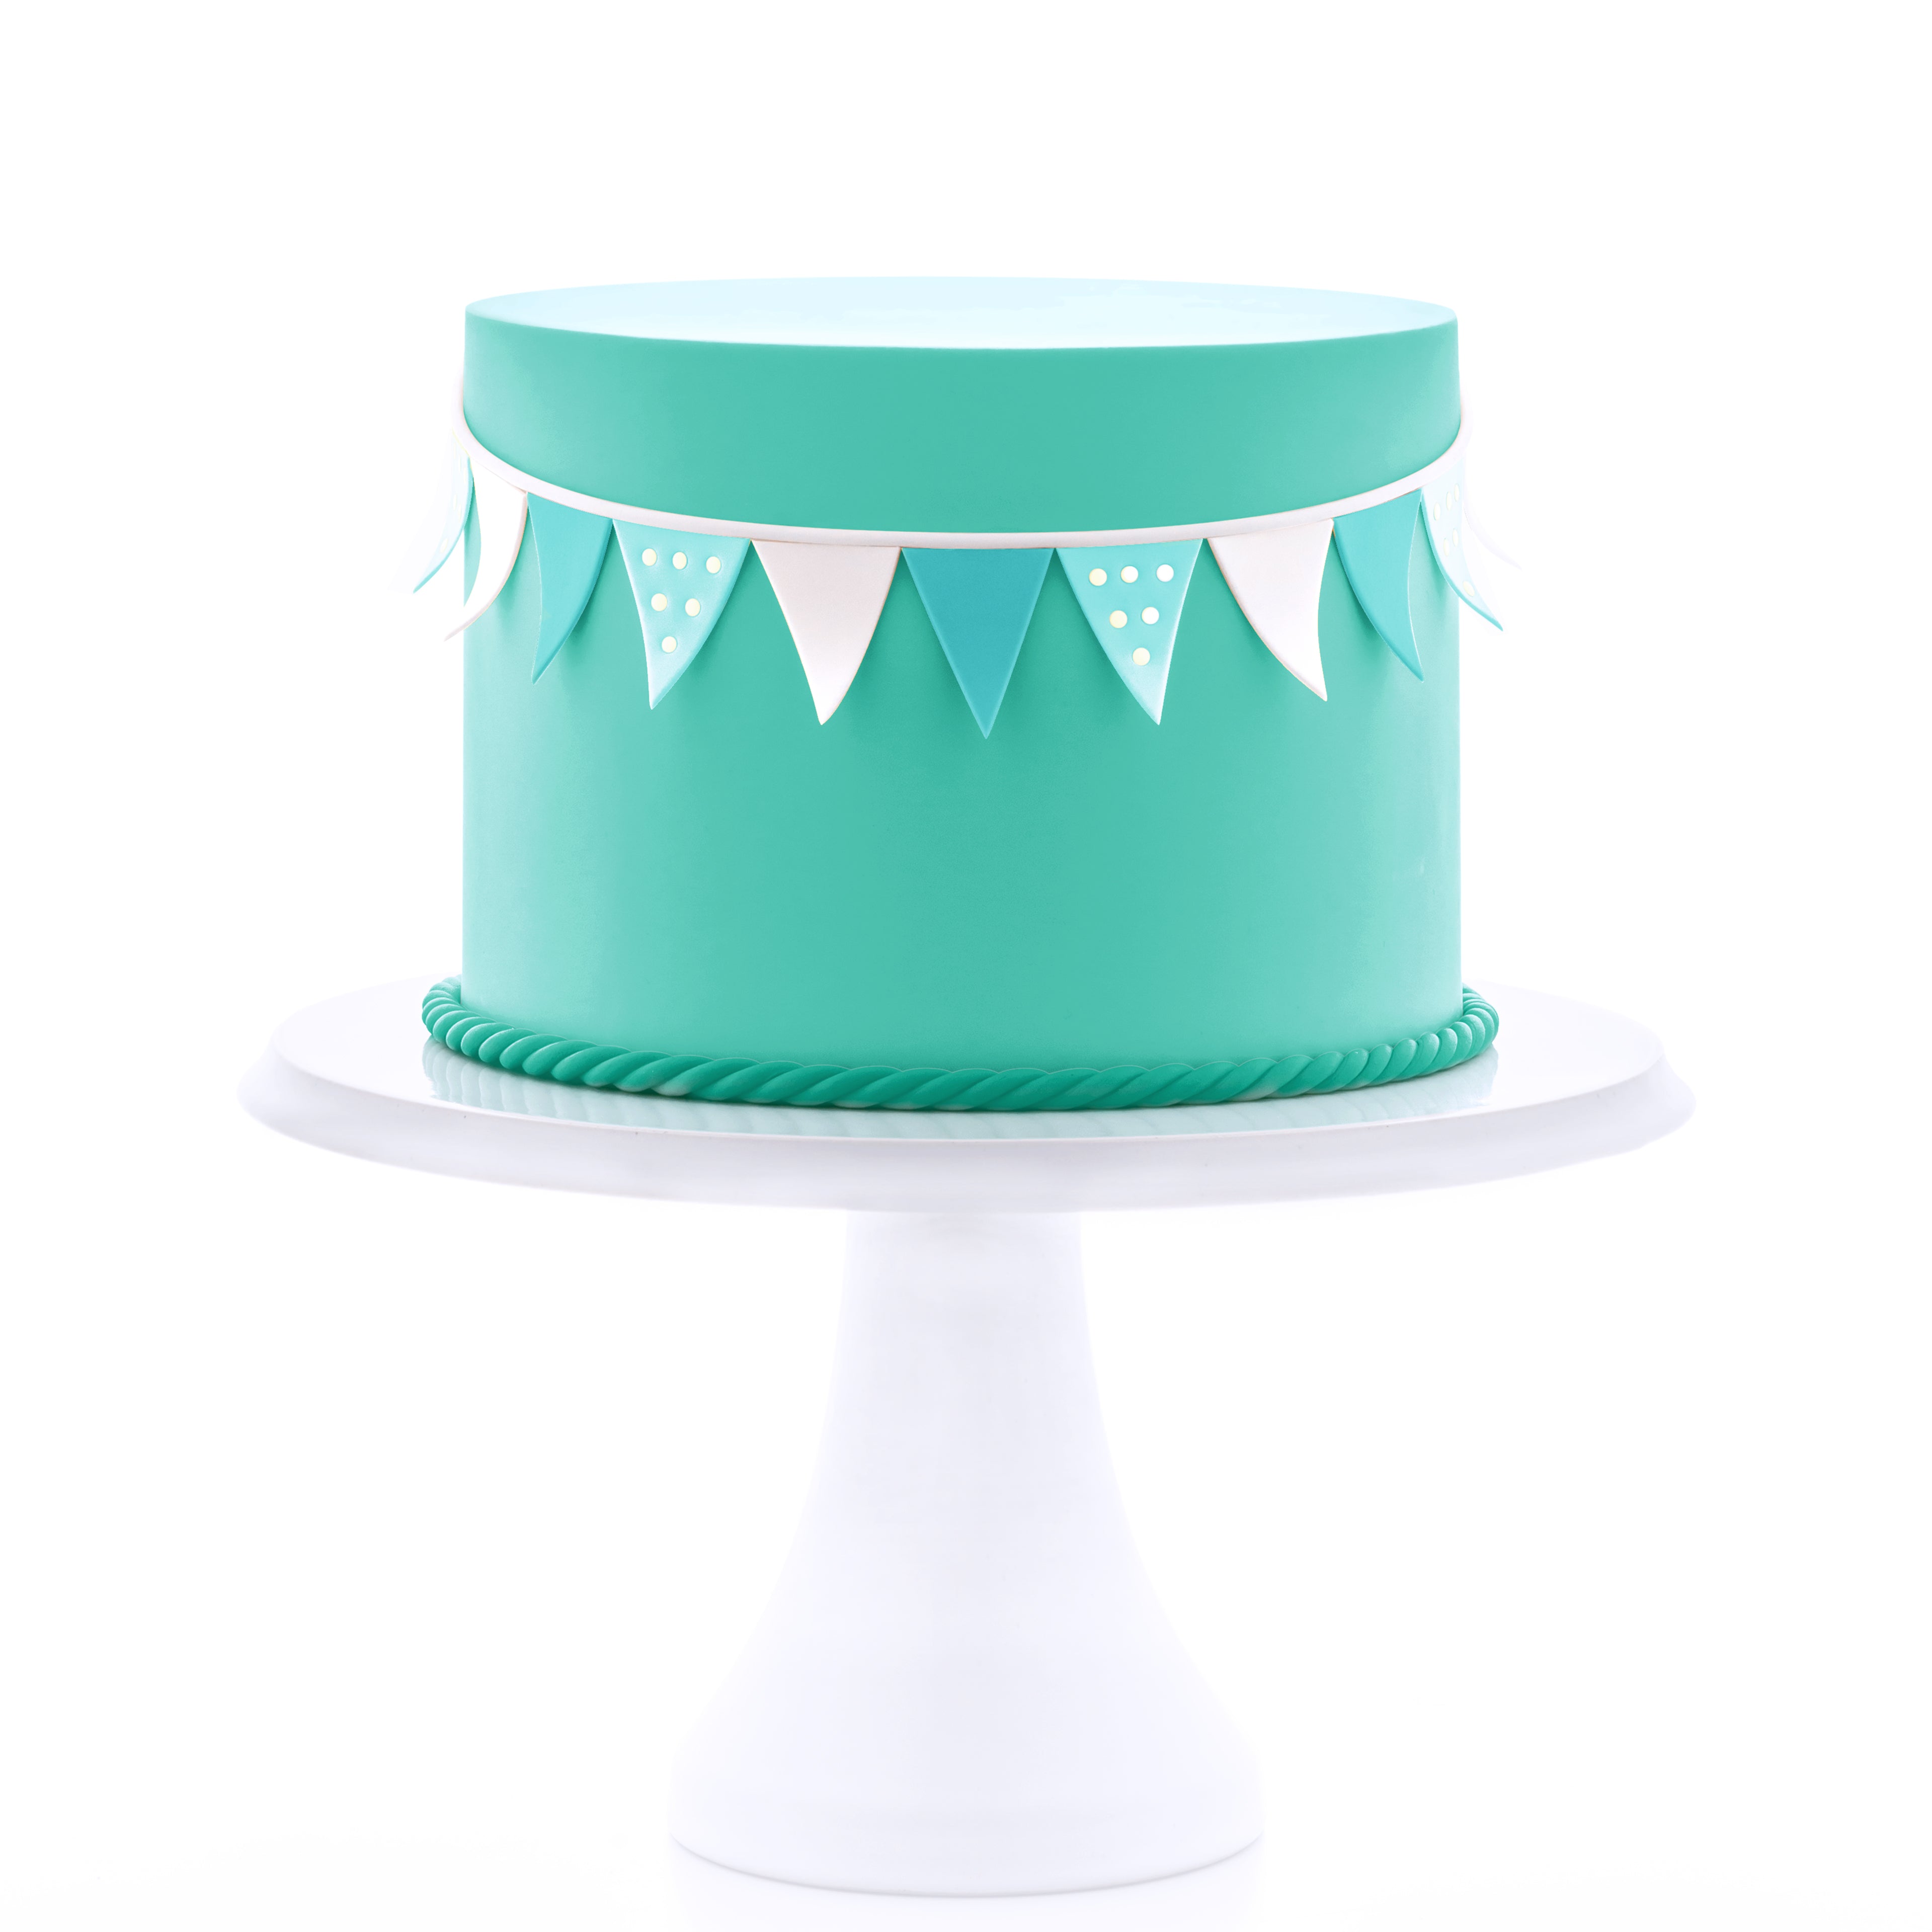 Turquoise Ombre Ruffle and Quilted Birthday Cake - - CakesDecor